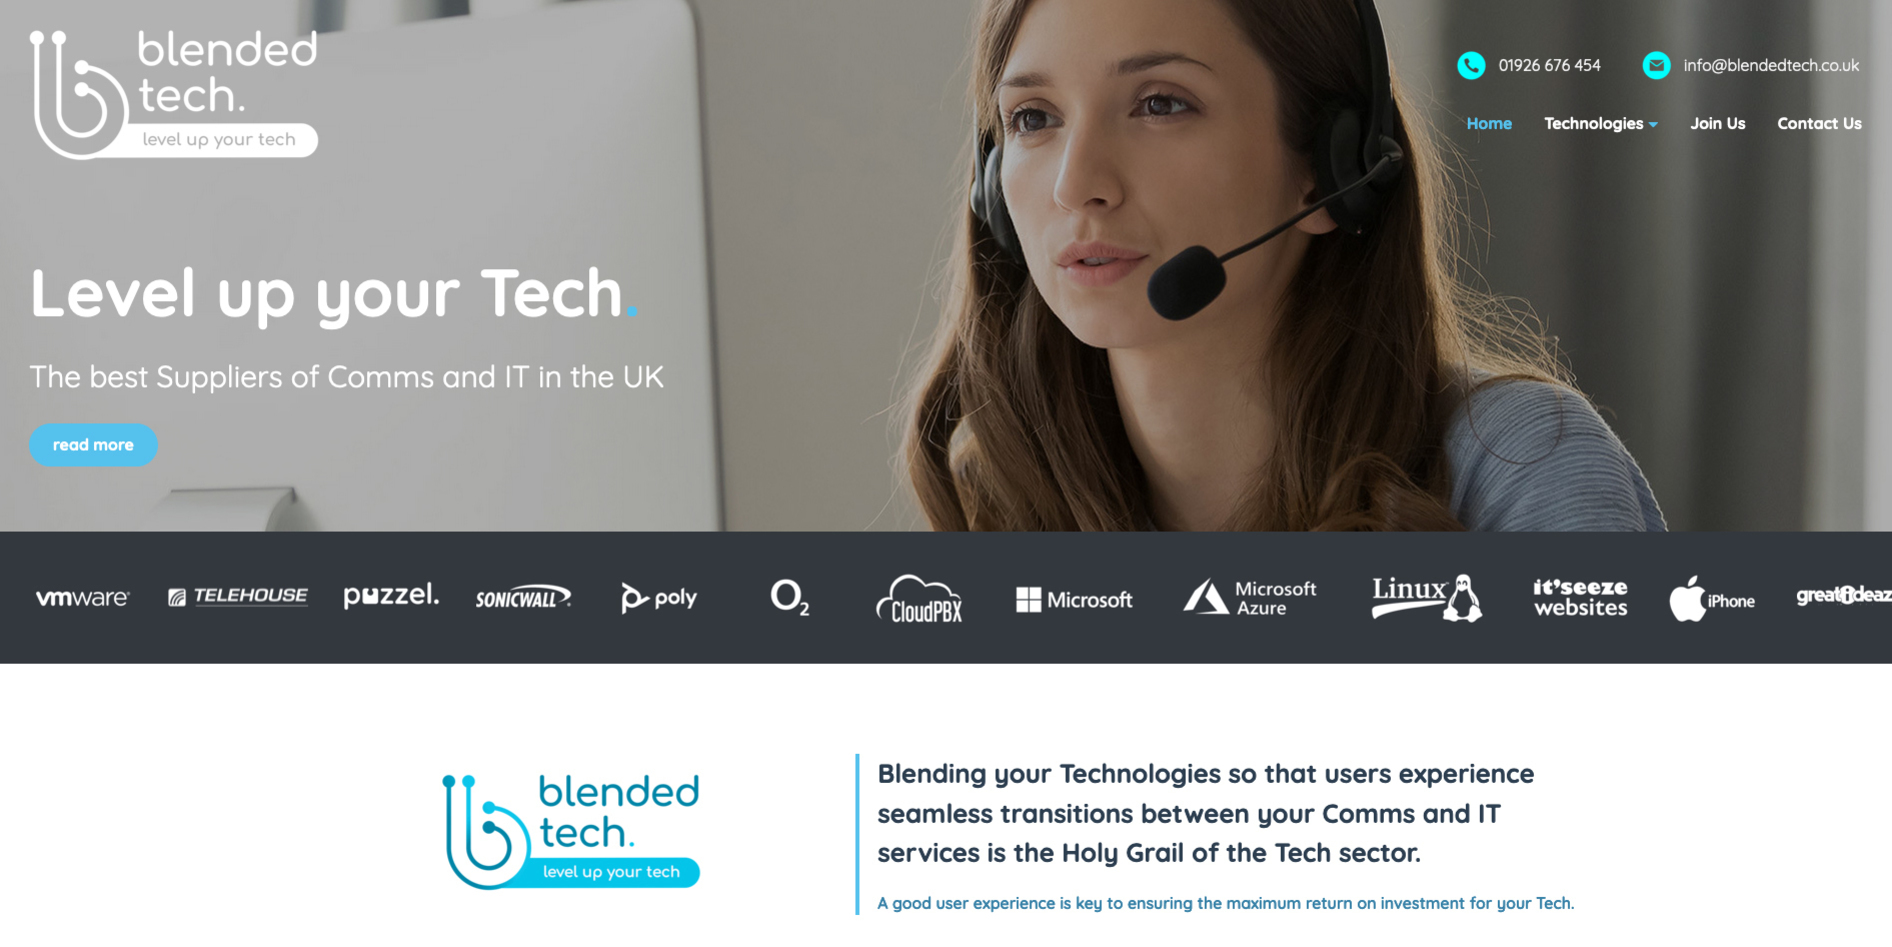 The new Blended Tech website from it'seeze